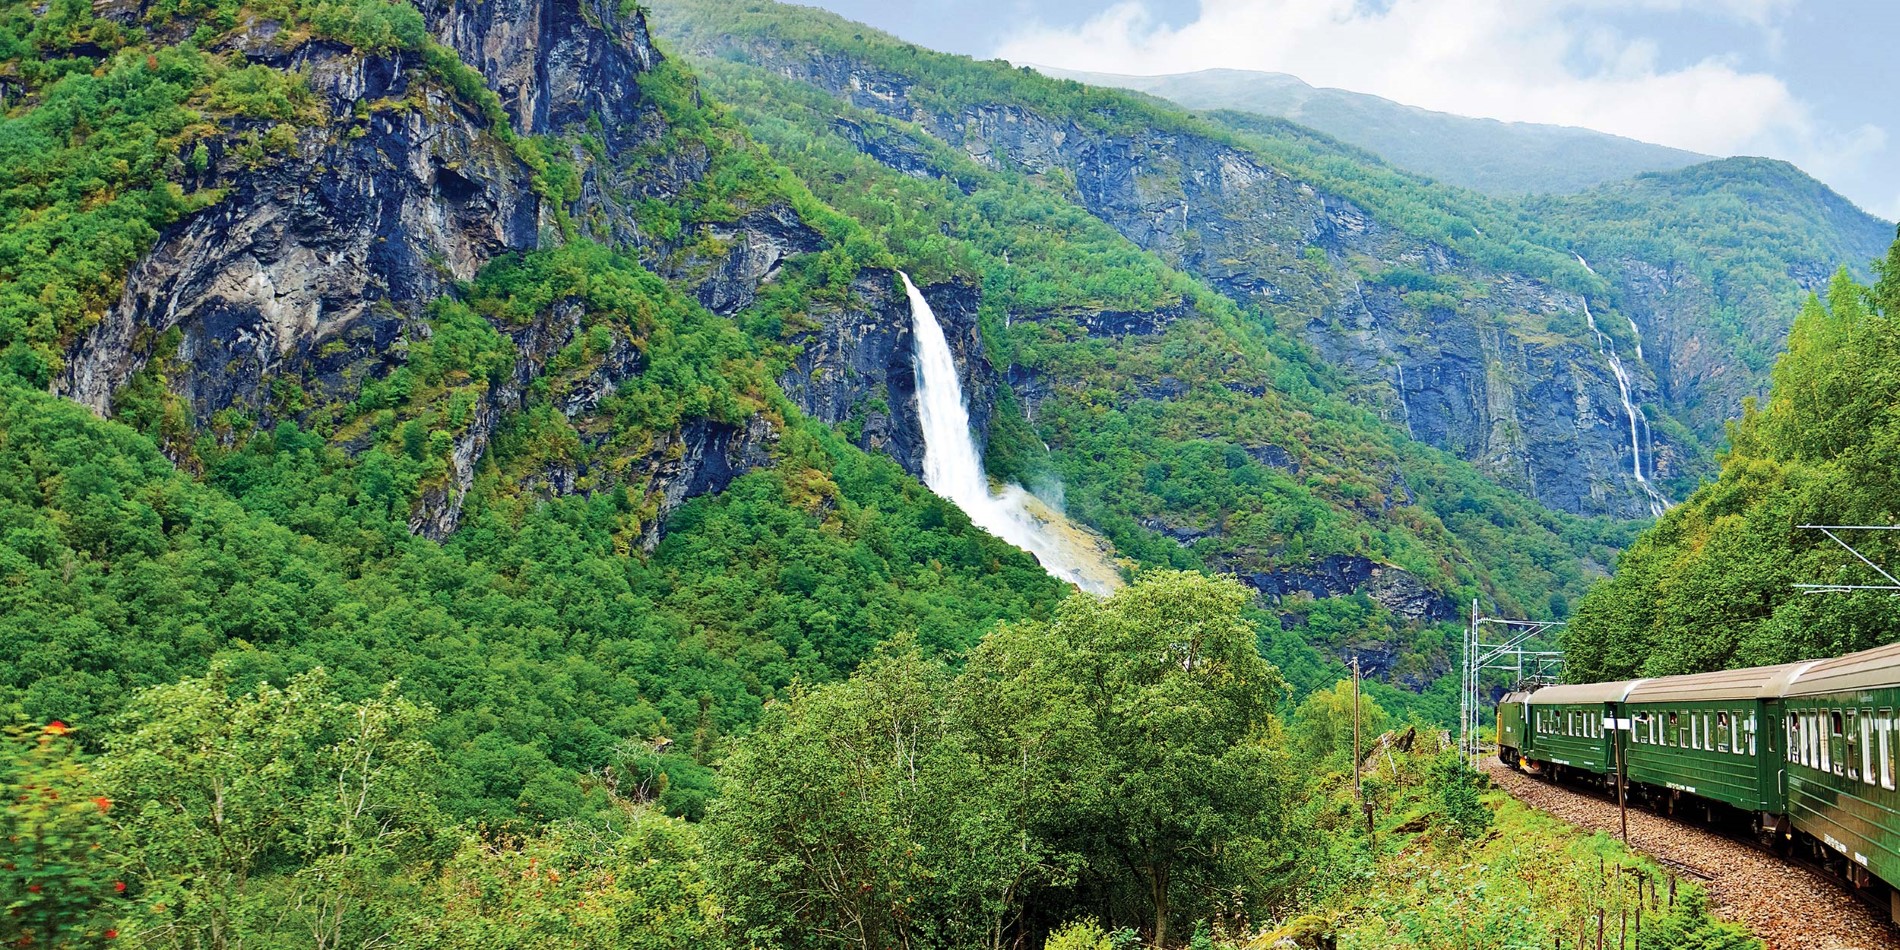 Experience one of Norway's most popular tours - Railway Flaam